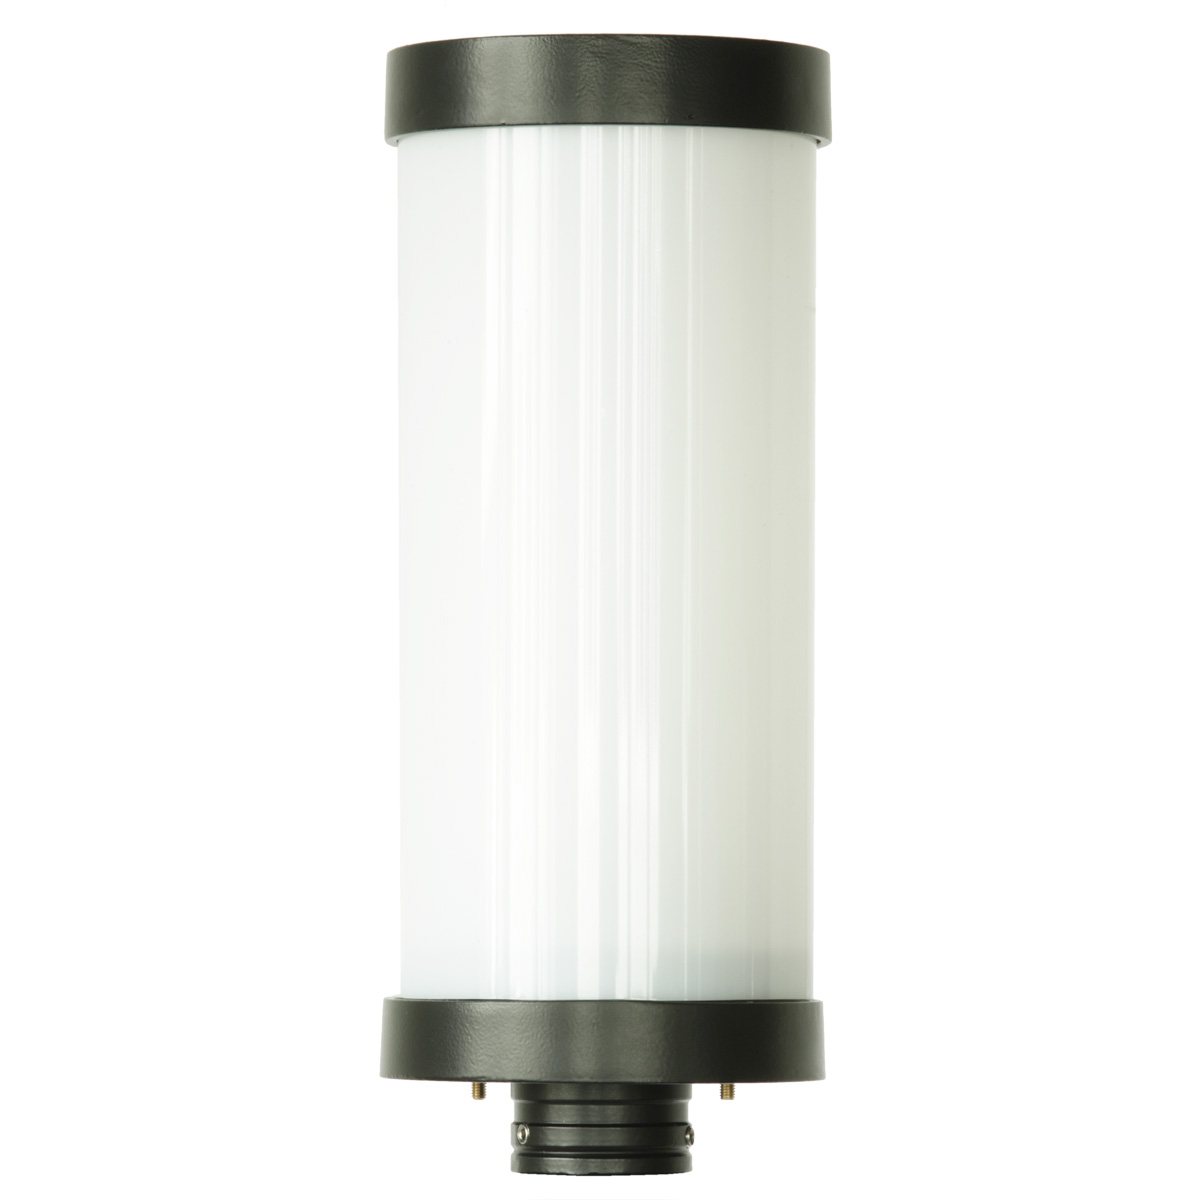 Tube light 37 A2 for wall and floor lamps